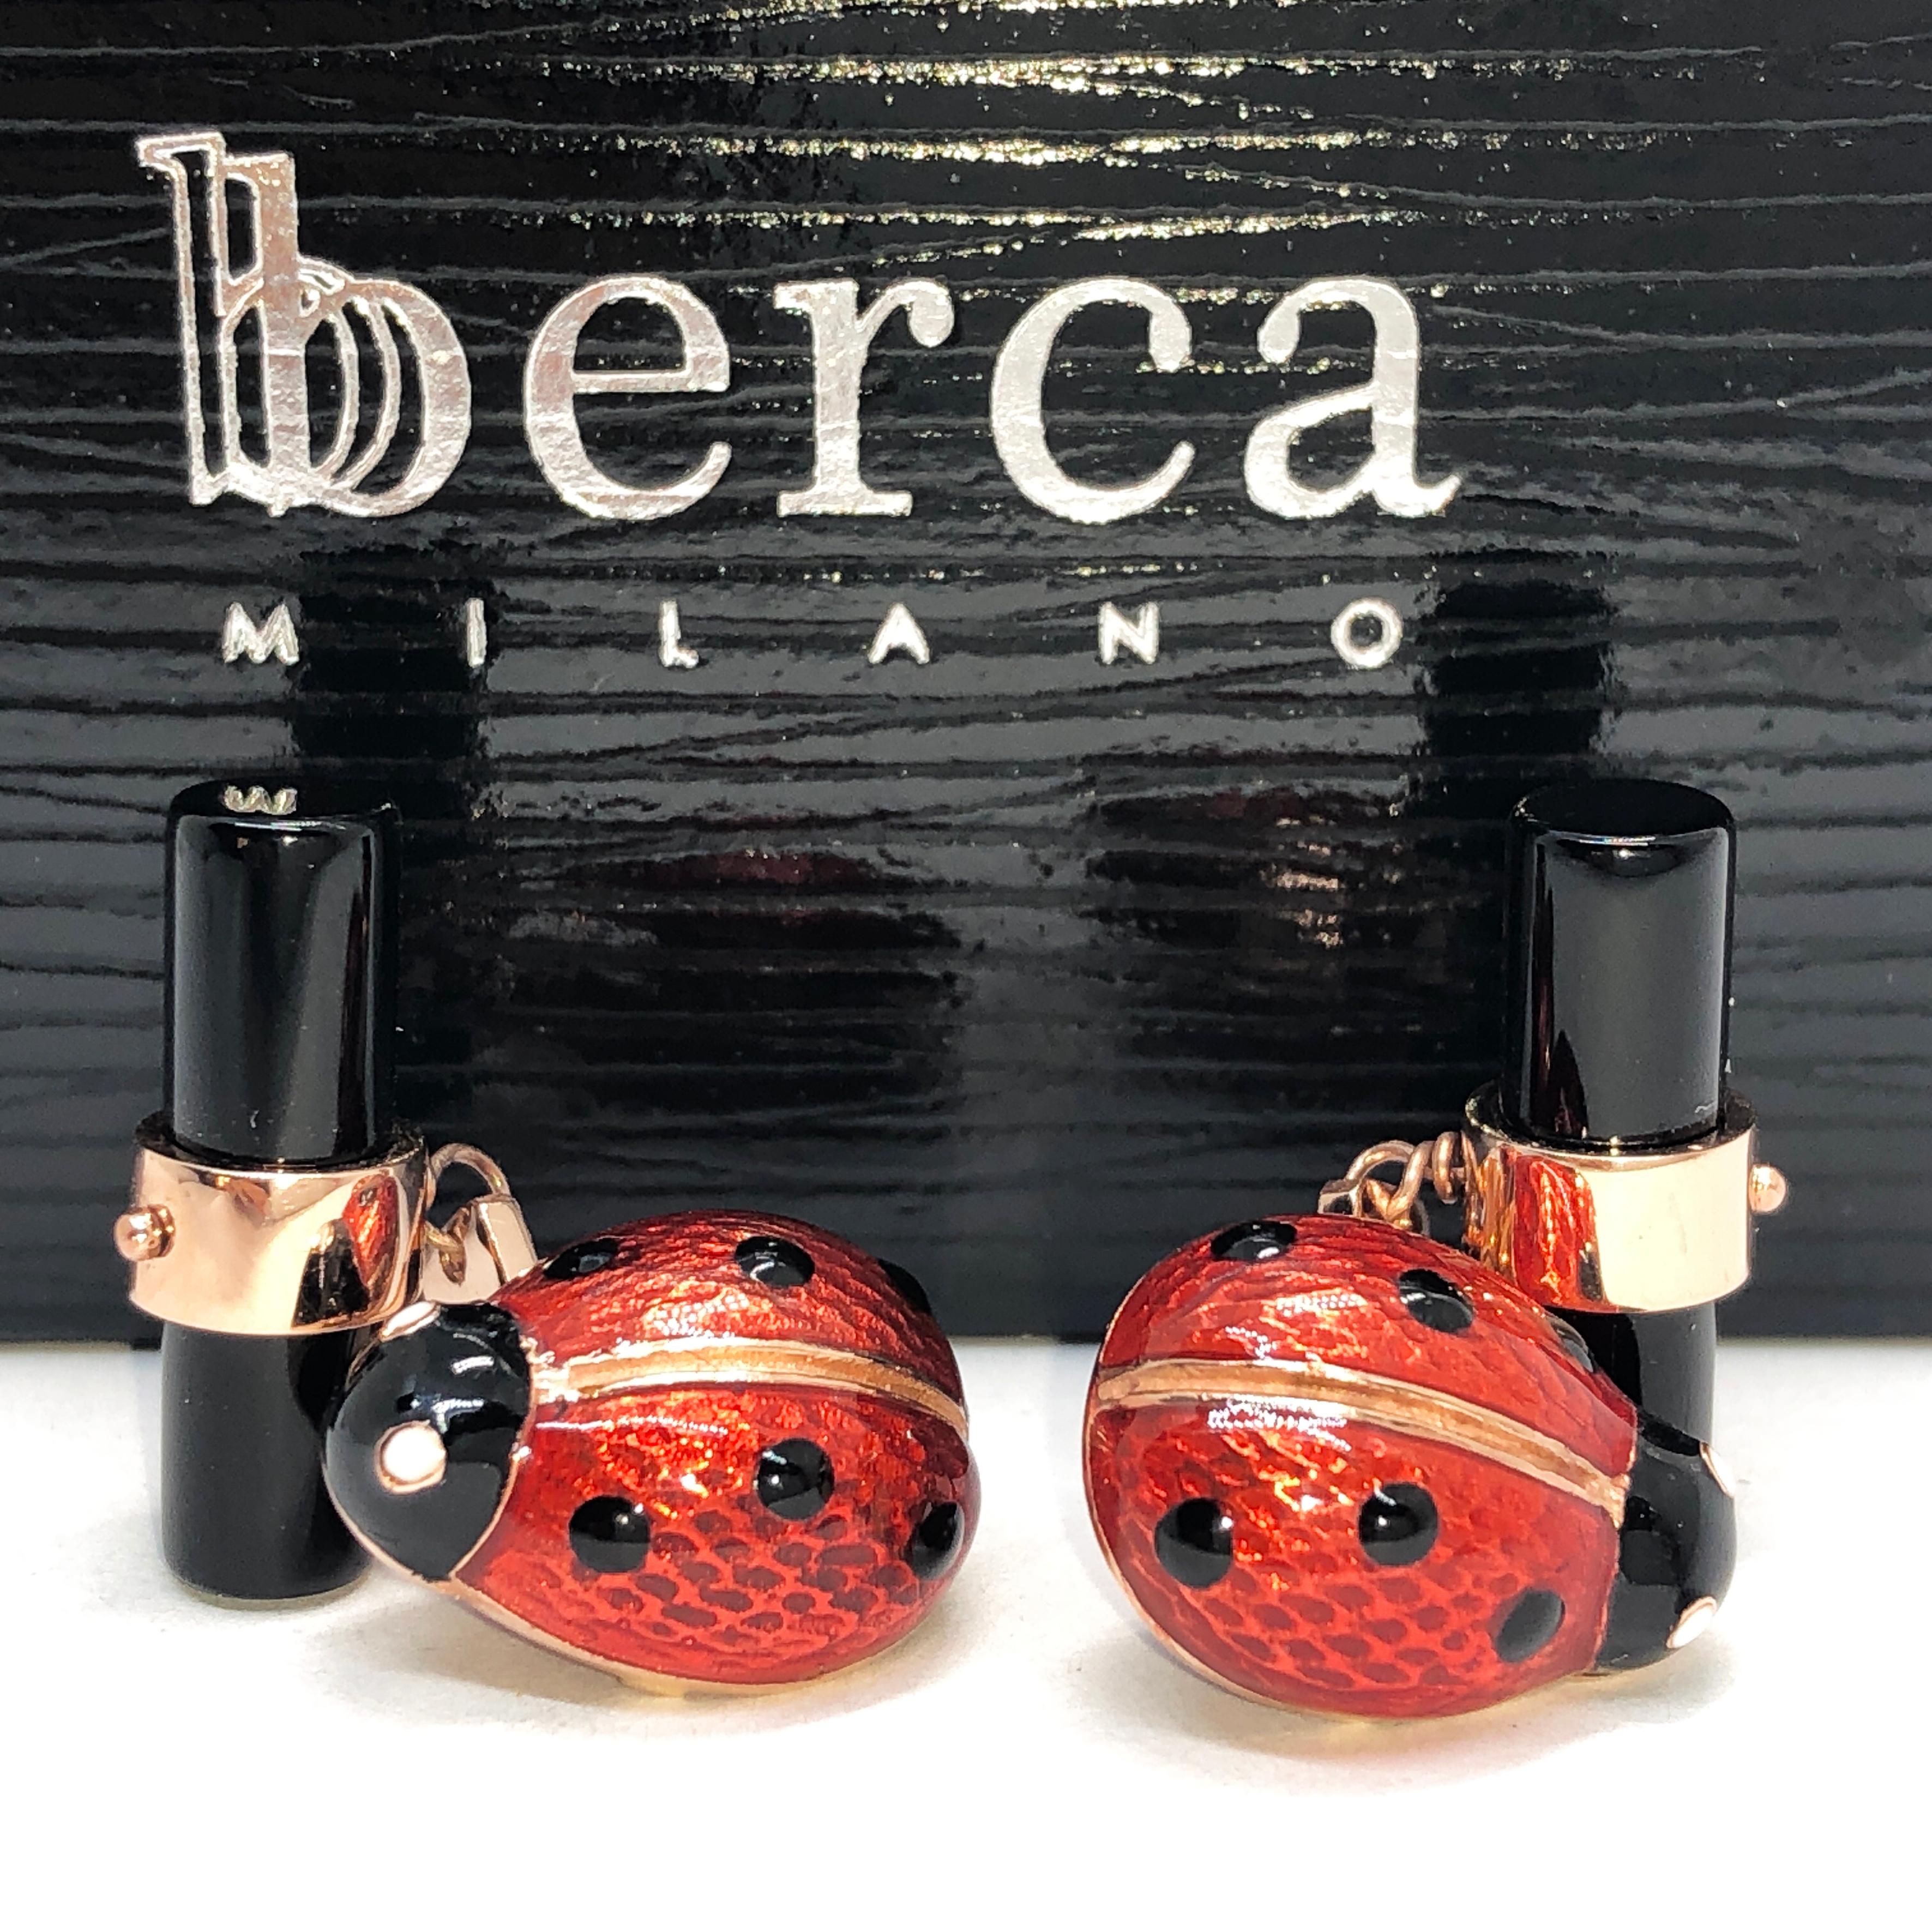 Chic, Timeless, but not Traditional Hand Enameled Little Ladybug Shaped Hand Inlaid Onyx Baton Back, Rose Gold Setting Cufflinks.
In a smart Black Box and Pouch.

24 Hours Express Shipping is complimentary to several destinations.

